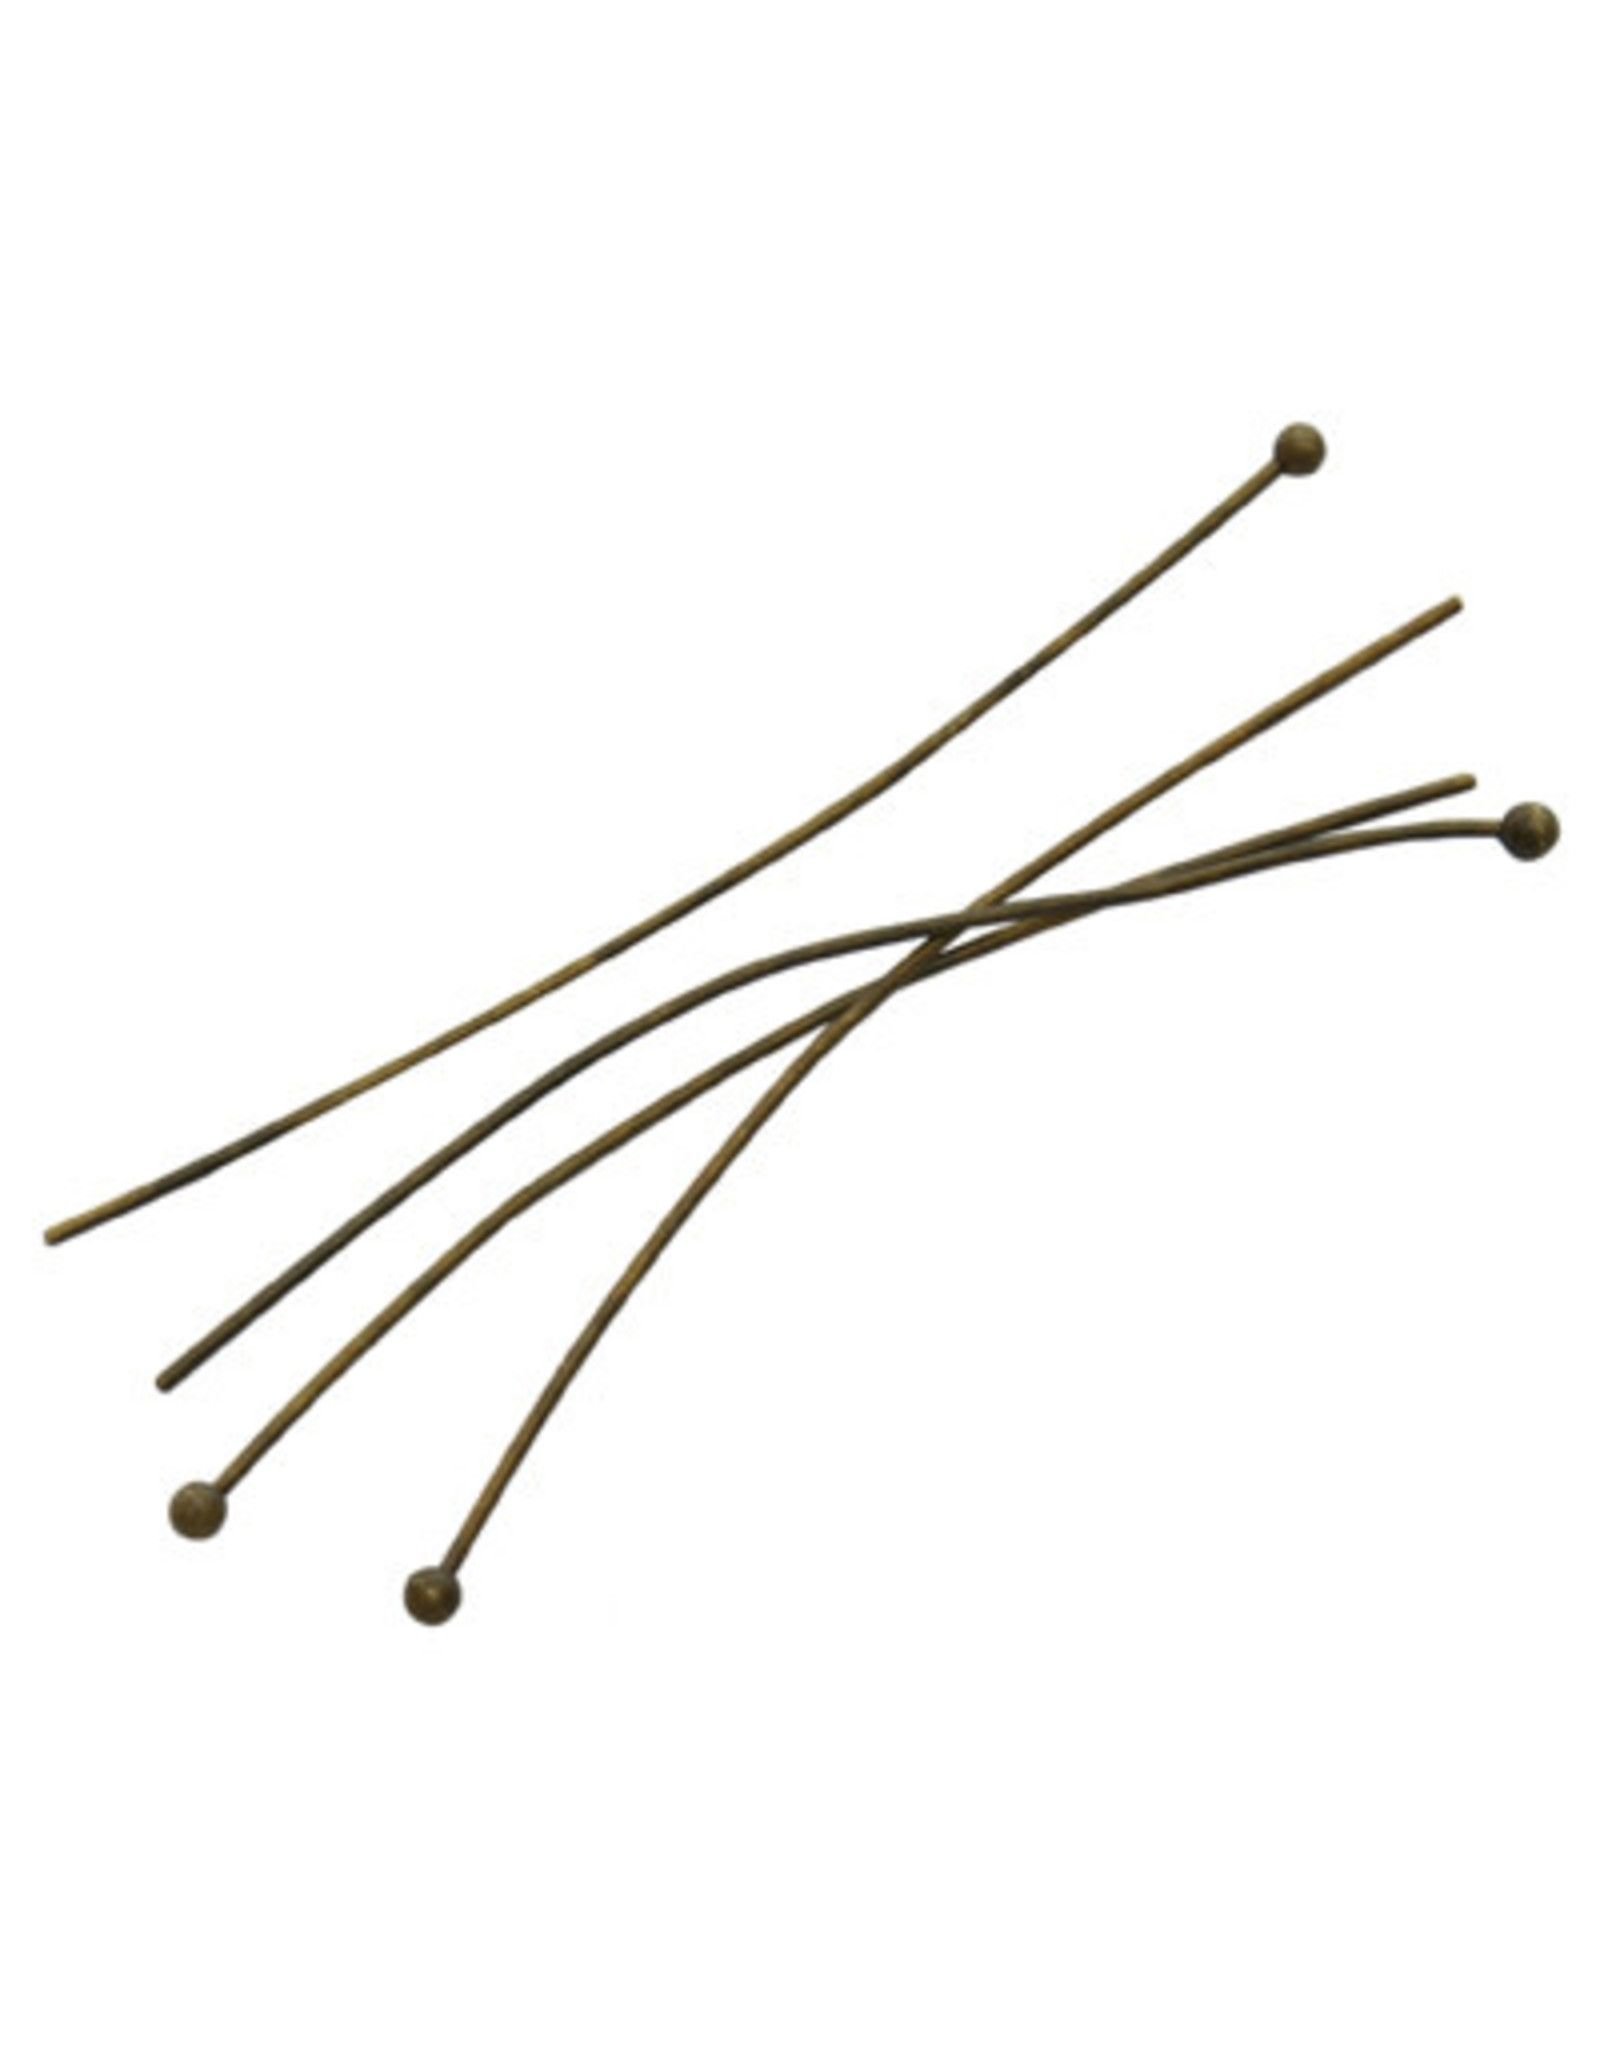 Headpin with 1.5mm Ball  2"  24g  Antique Brass   x100   NF